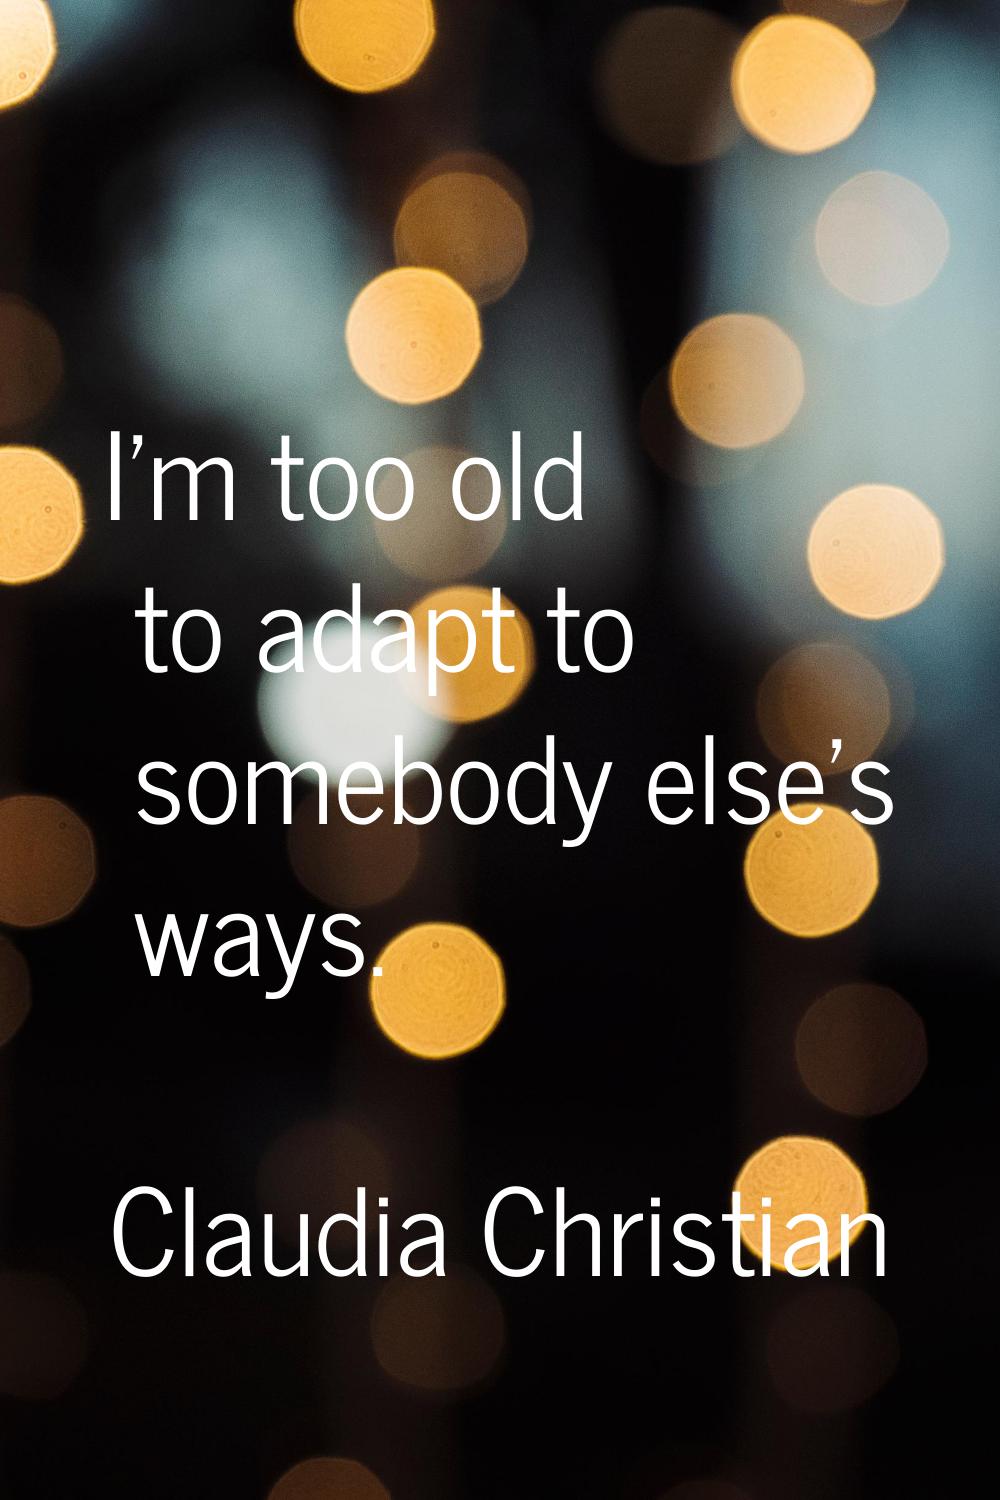 I'm too old to adapt to somebody else's ways.